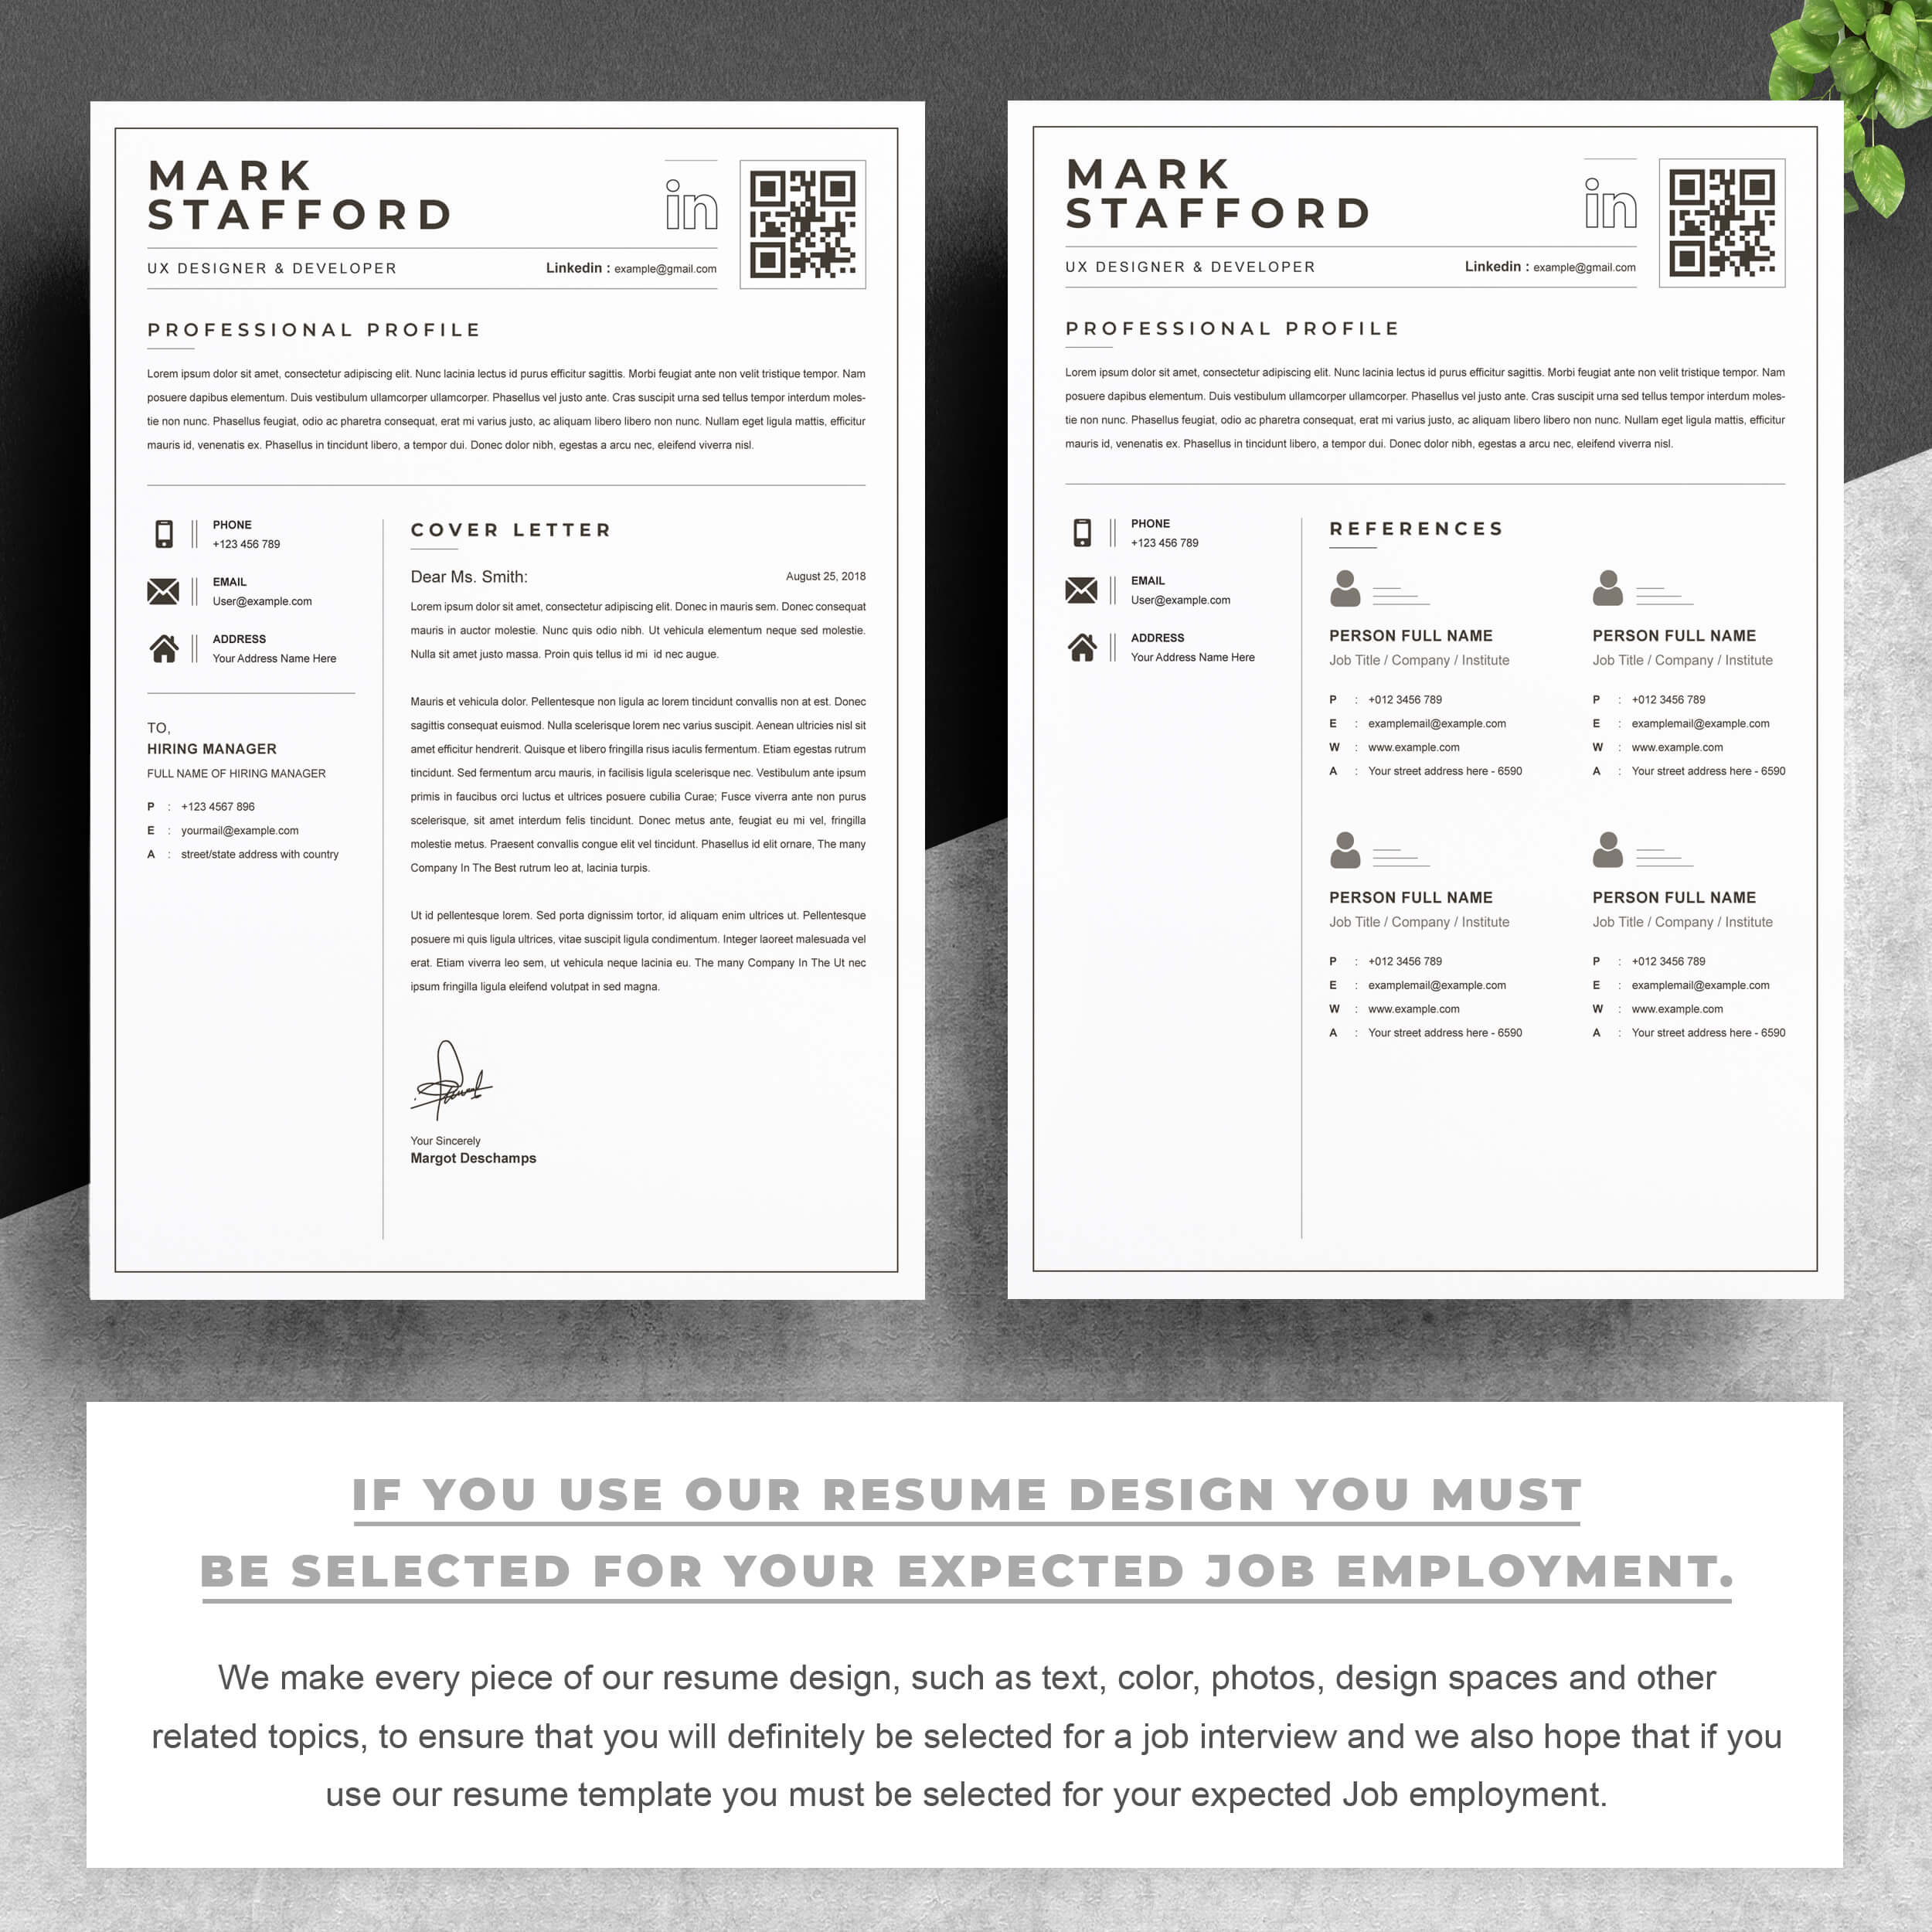 03 2 pages free resume design template copy 2 570